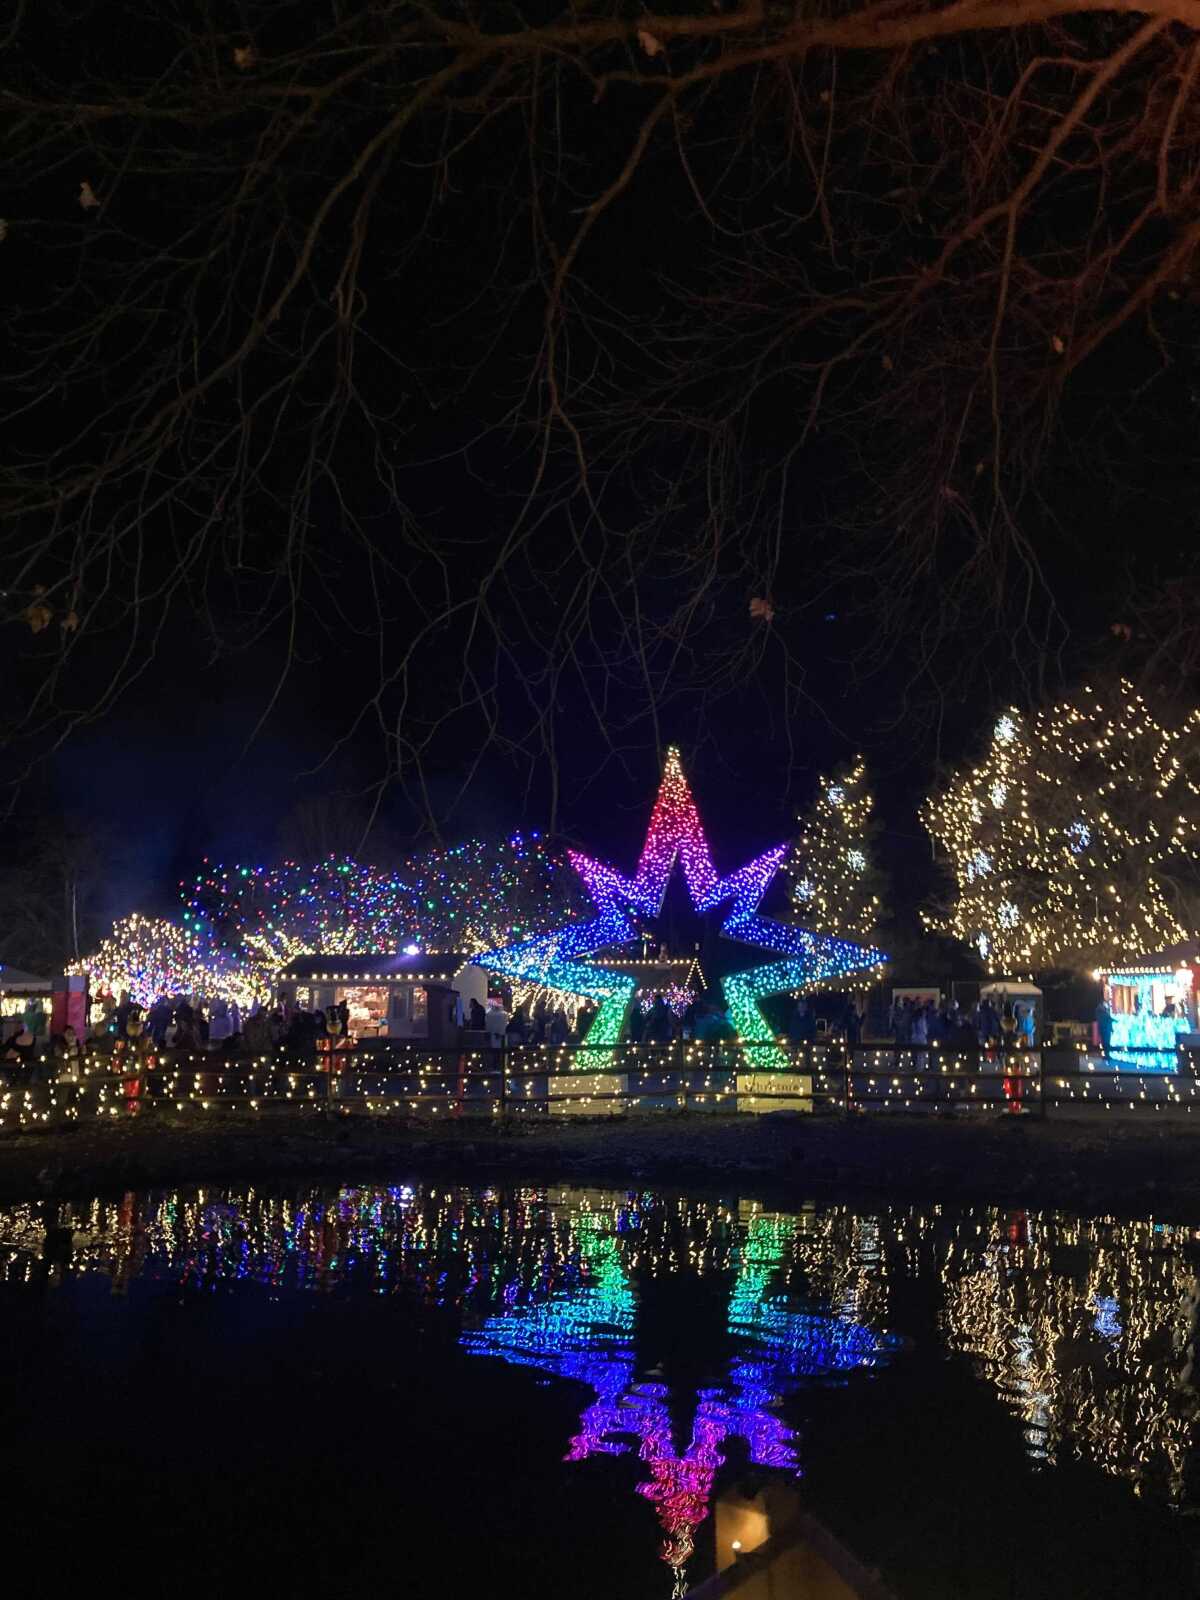 The Lehigh Valley Zoo's "Winter Light Spectacular" includes over 1.2 million lights.